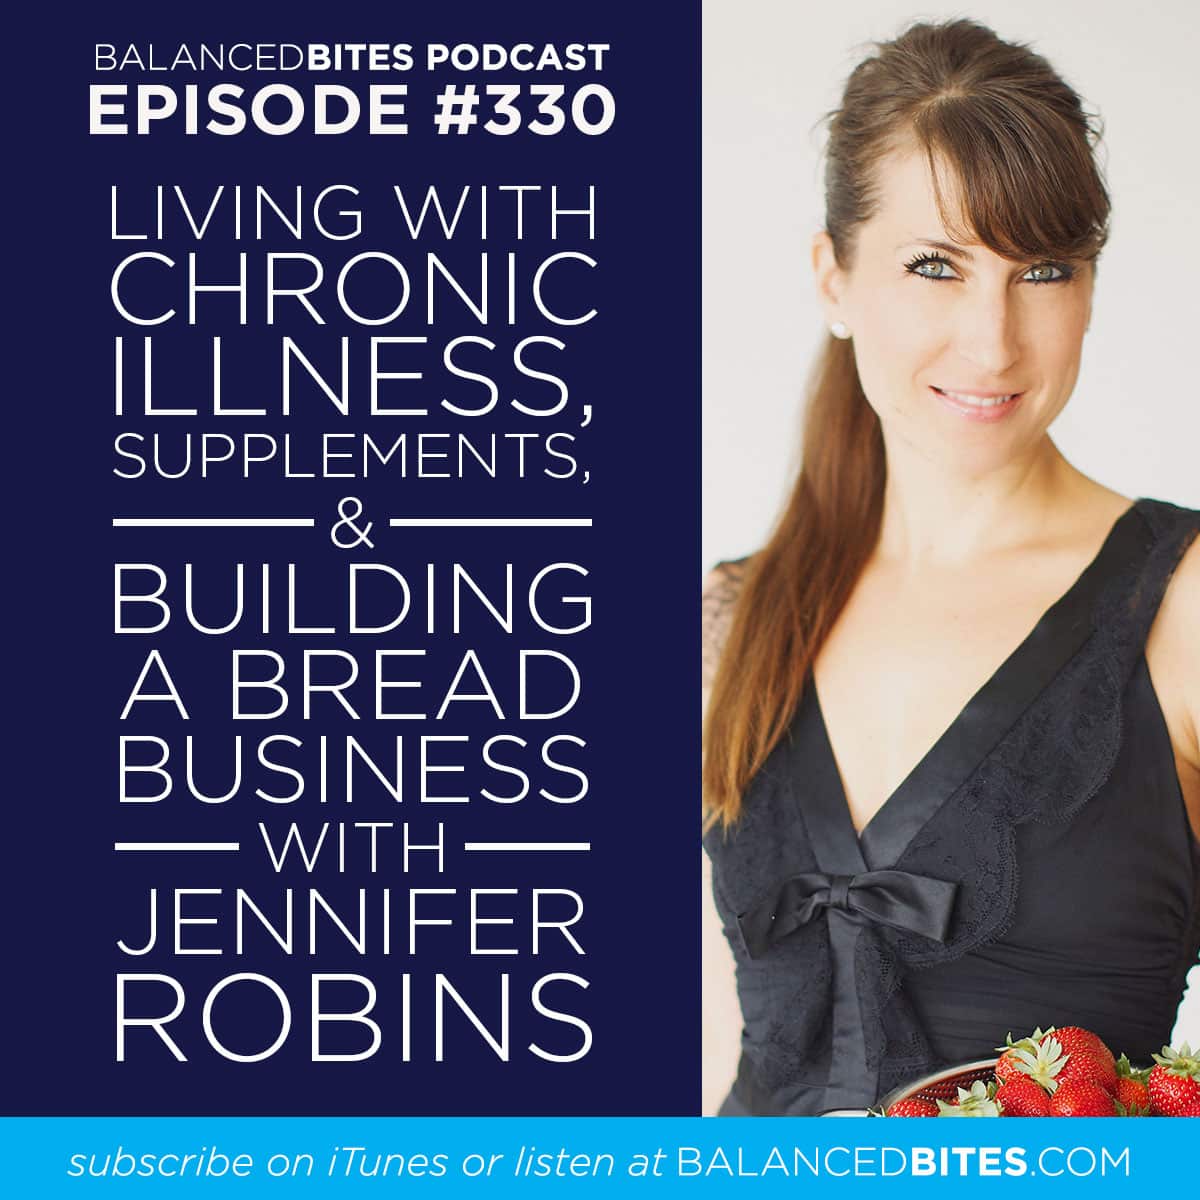 Balanced Bites Podcast with Diane Sanfilippo & Liz Wolfe | Living with chronic illness, supplements, & building a bread business with Jennifer Robins